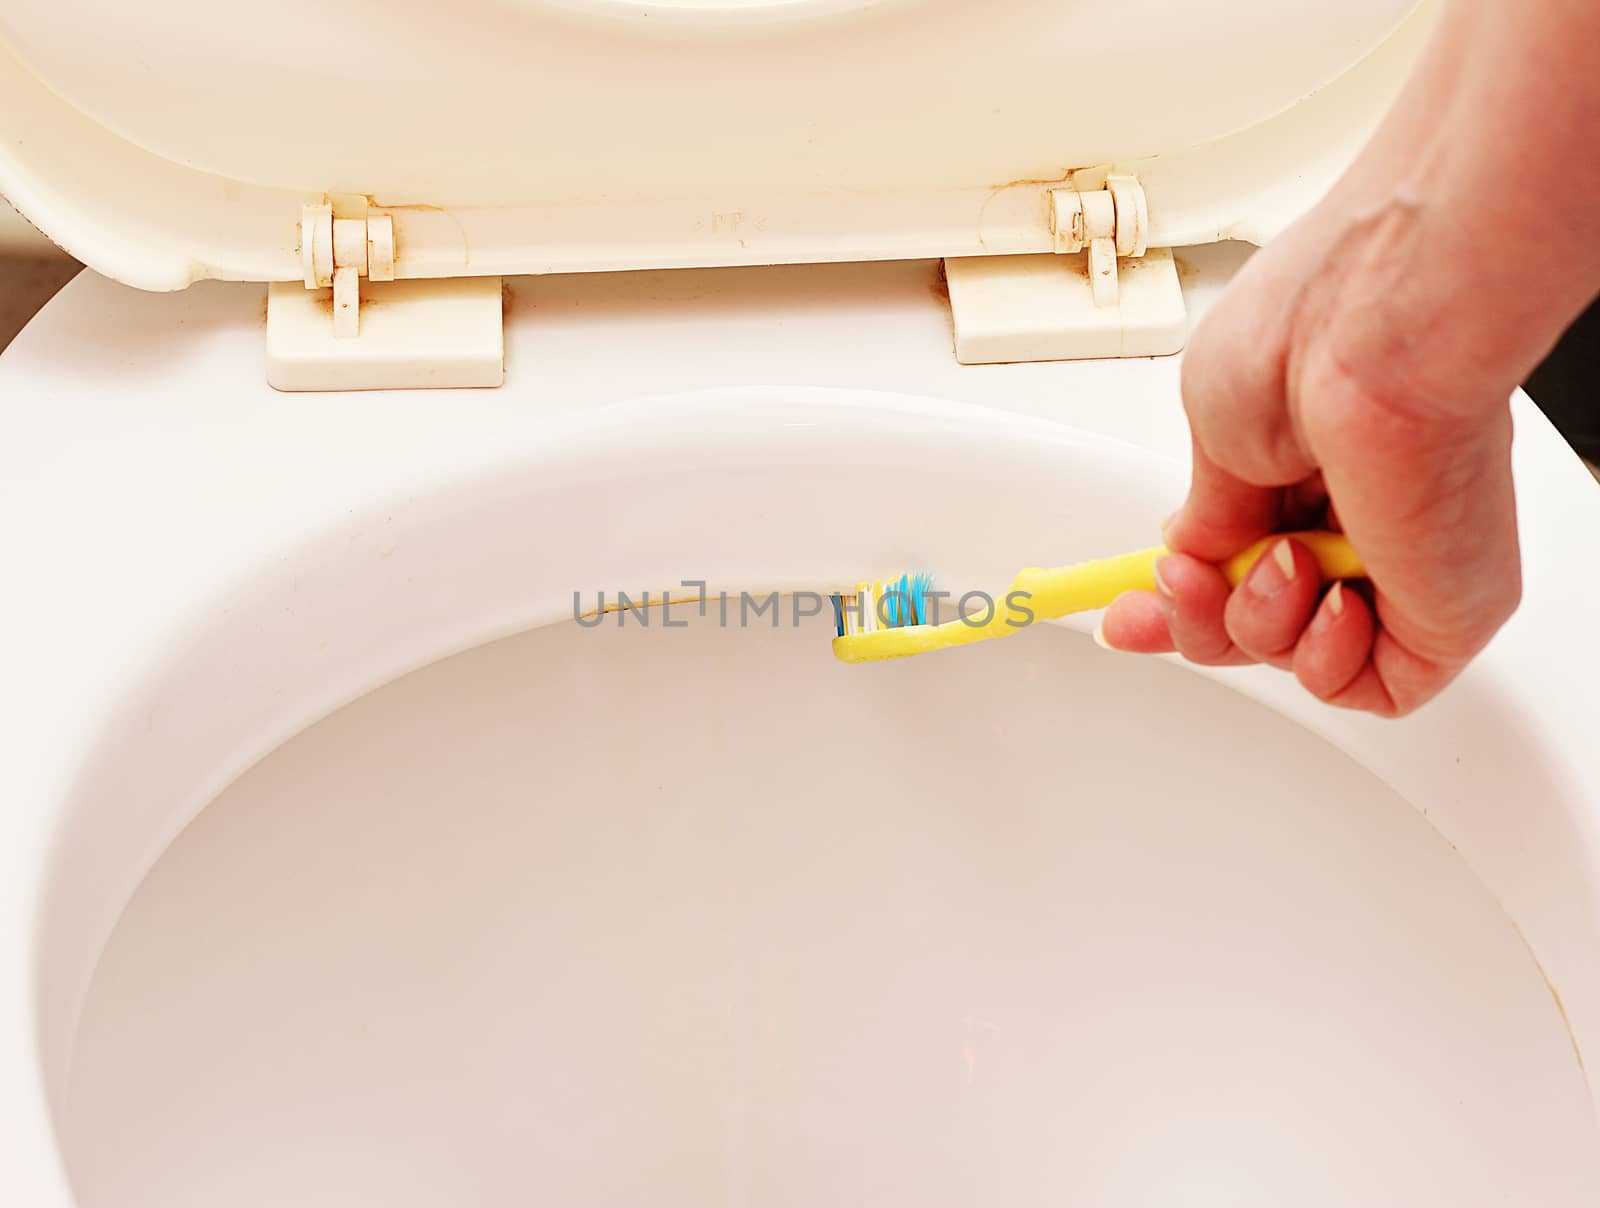 Very thorough cleaning toilets use a toothbrush.